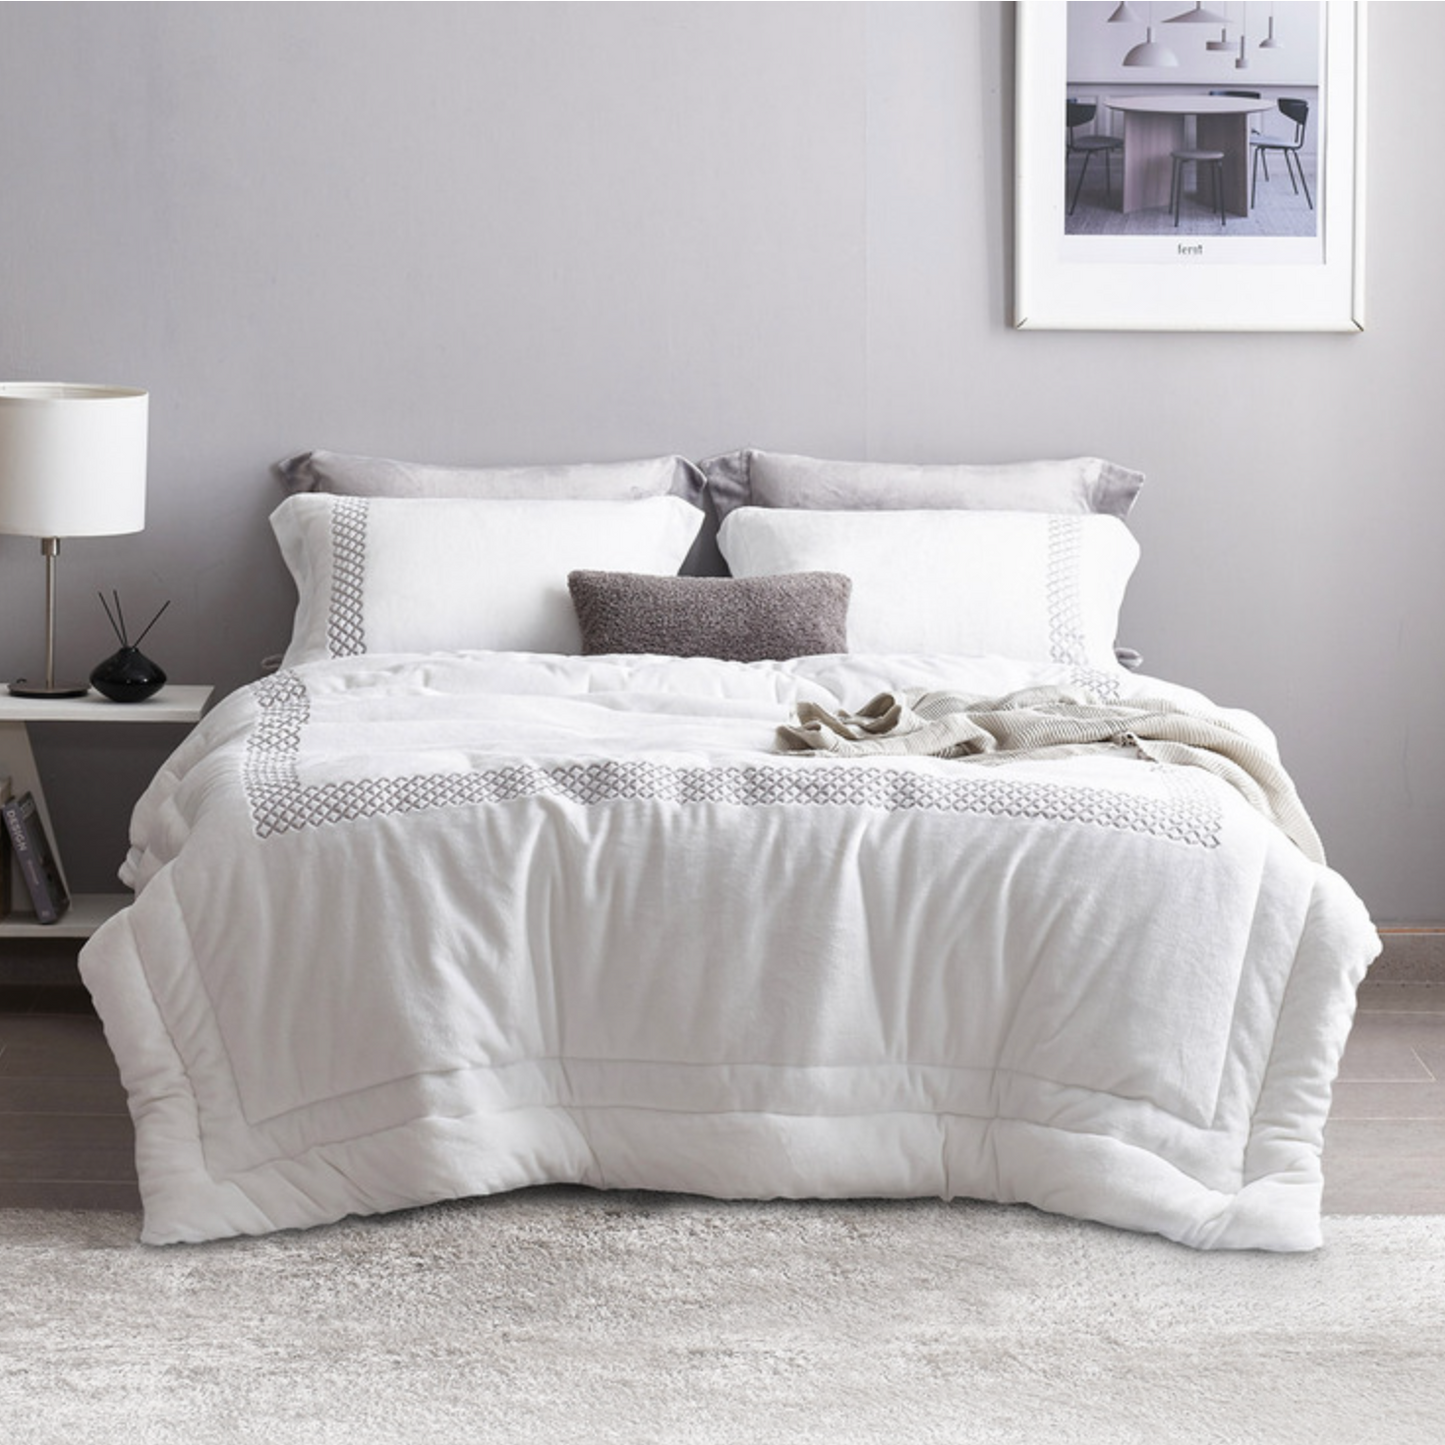 [NEW] Hotel Style Ultra Soft Real Mink Touch Comforter